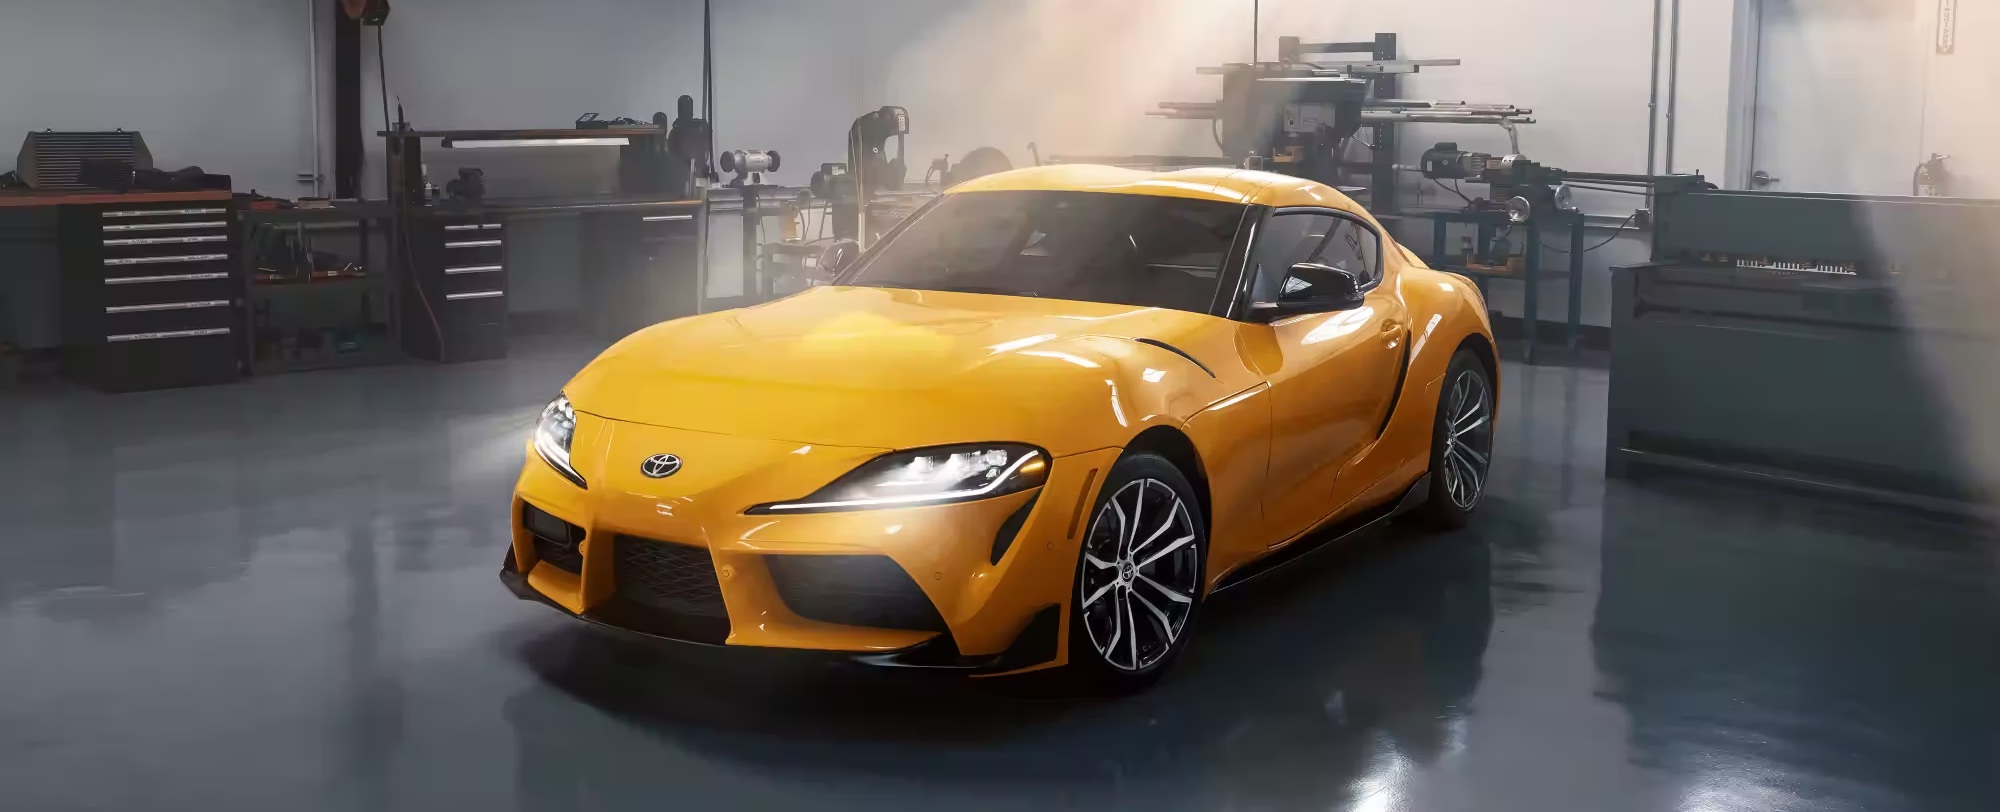 2021 Toyota Supra 3.0 First Drive: Patience Pays Off